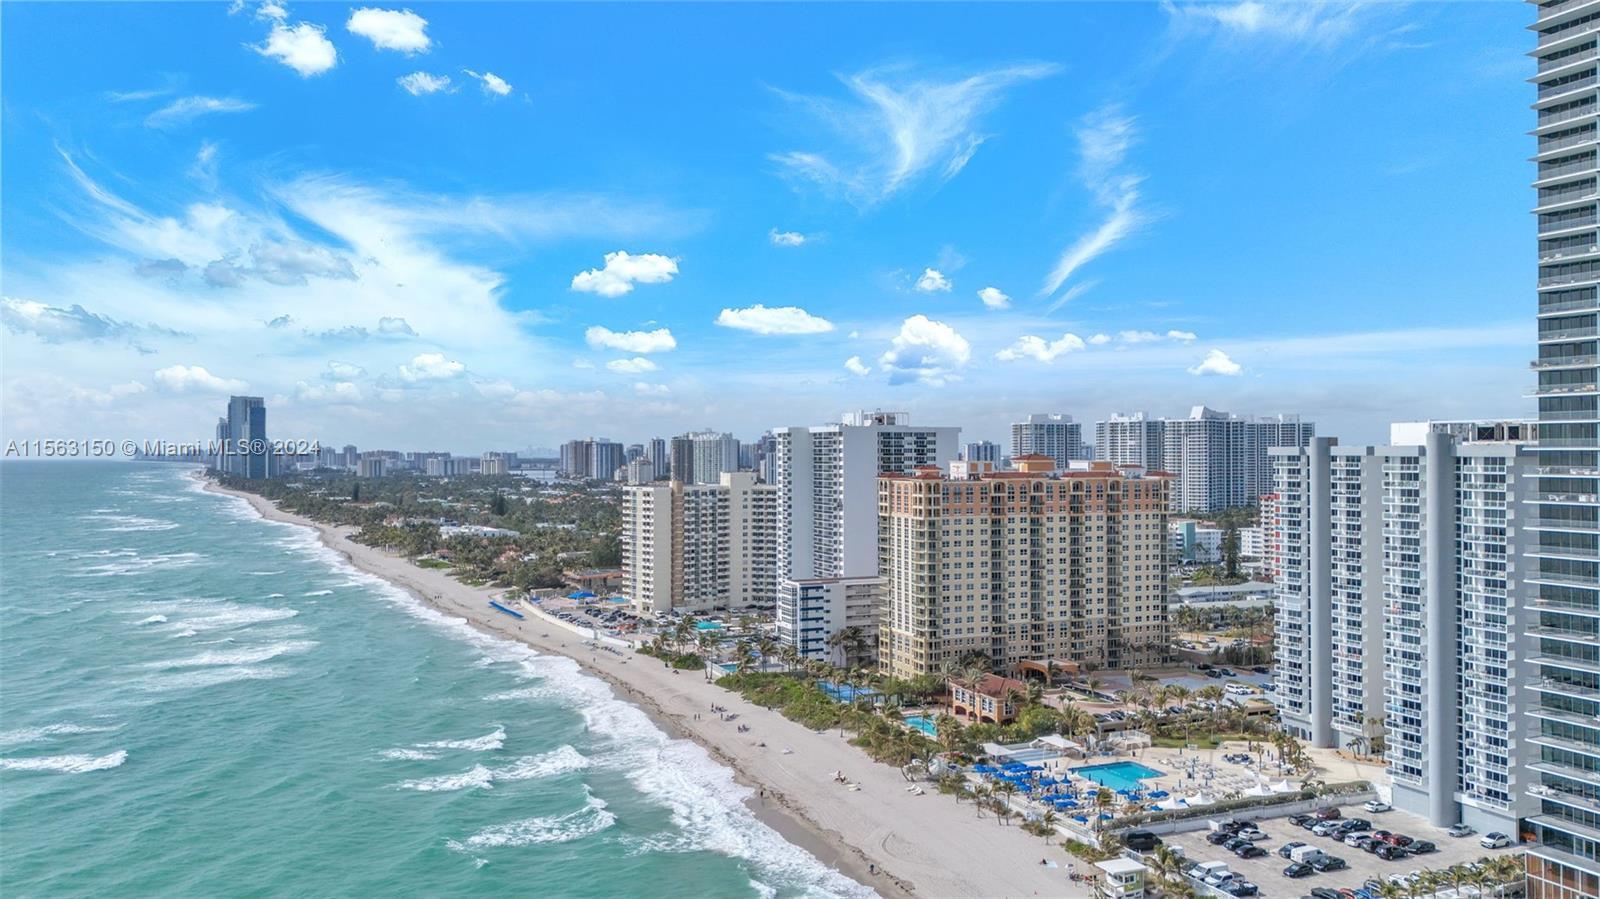 Beautiful Ocean View! Parker Plaza offers a coveted beachfront location with resort-style amenities.